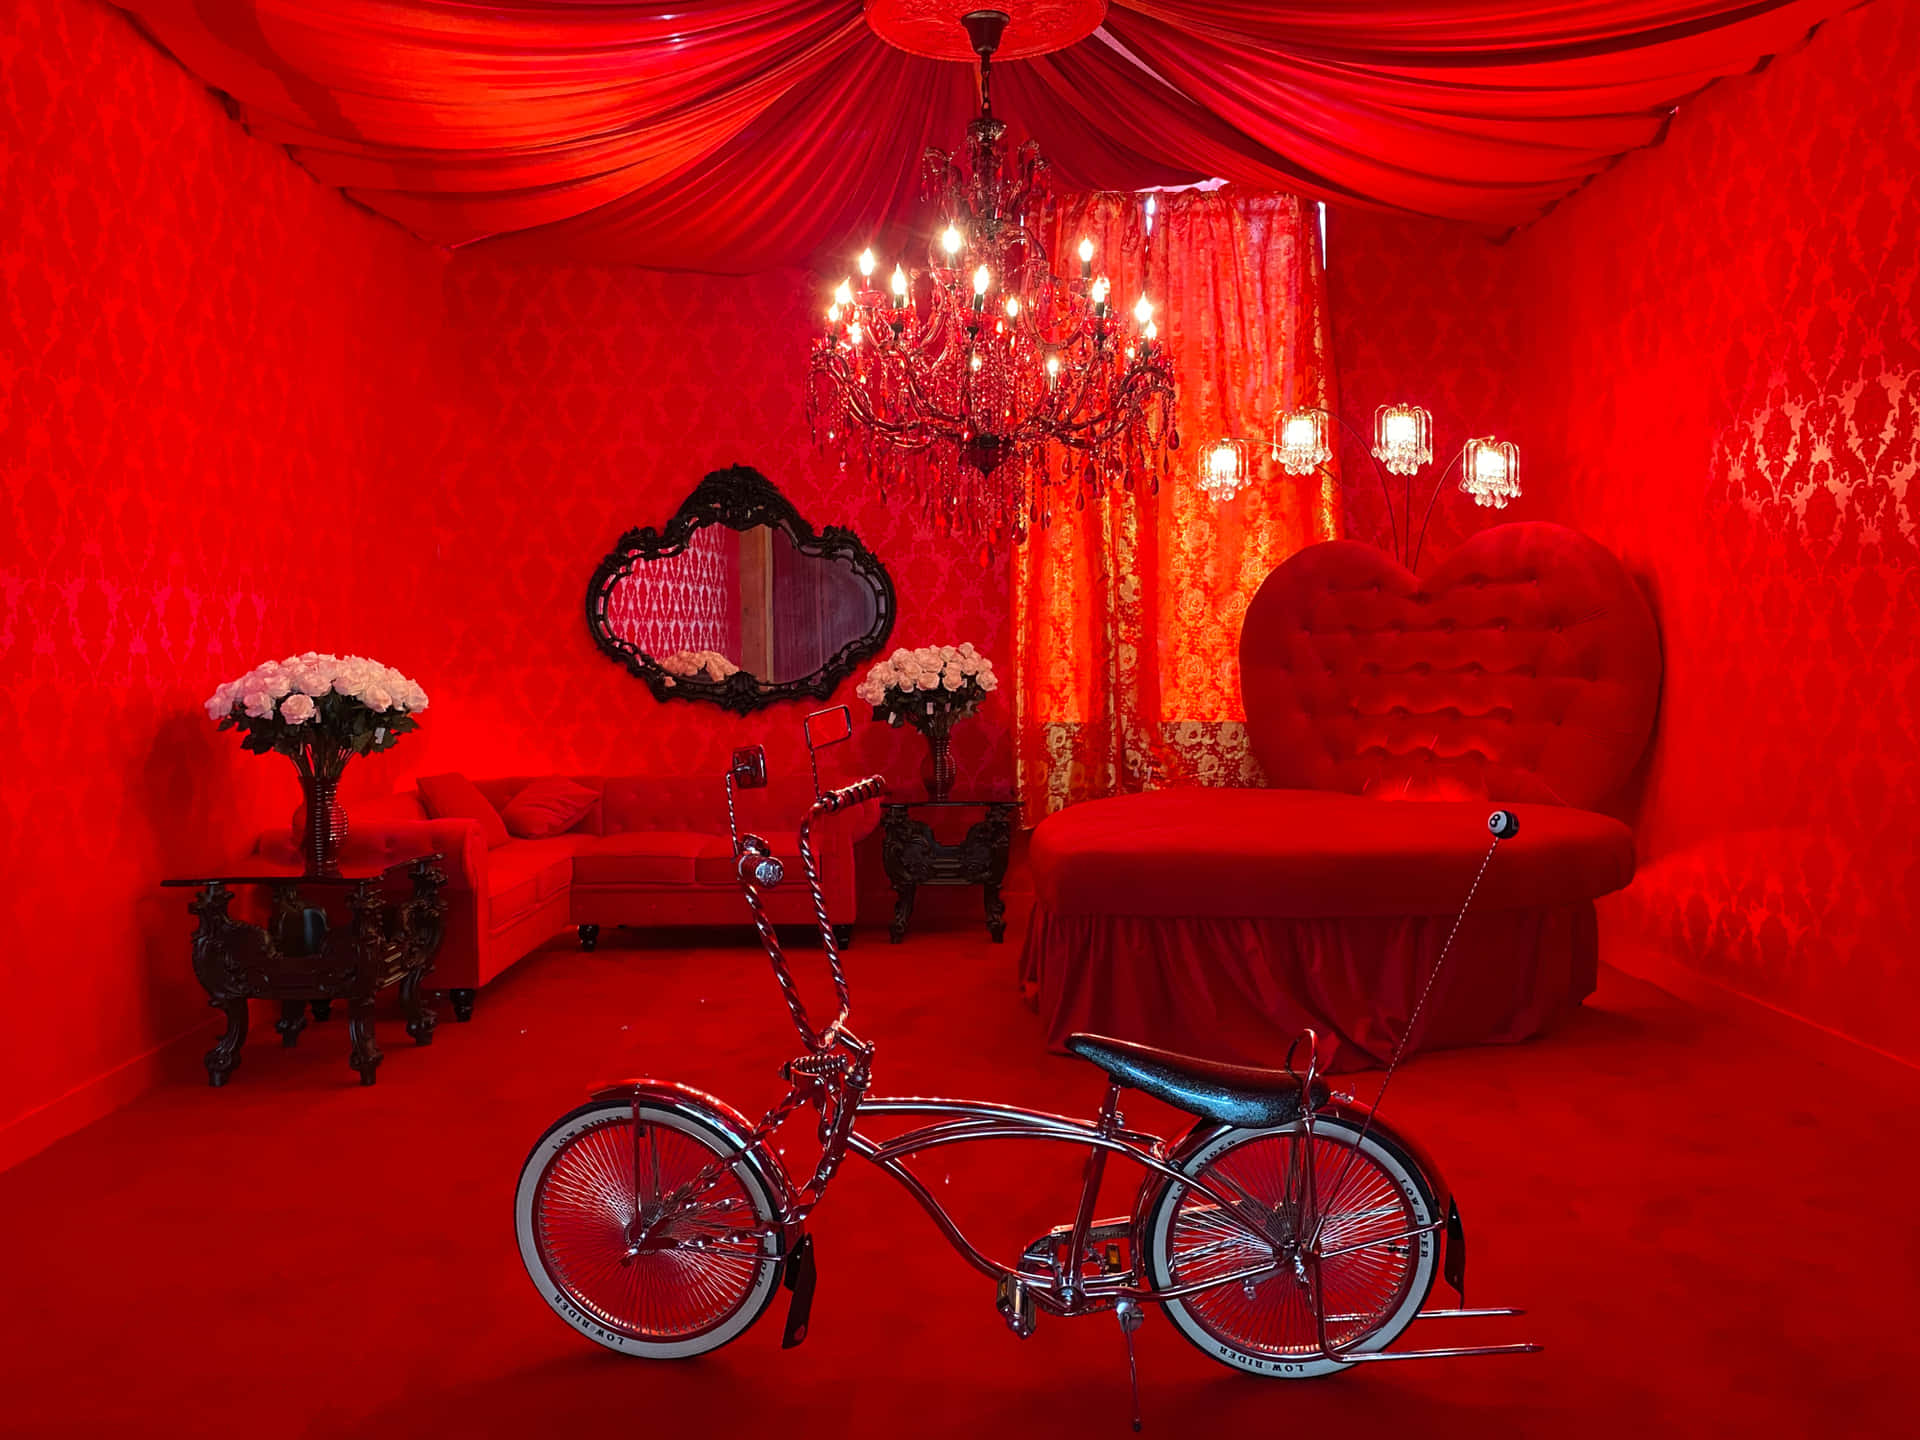 "Relax in the calming atmosphere of a Red Room"